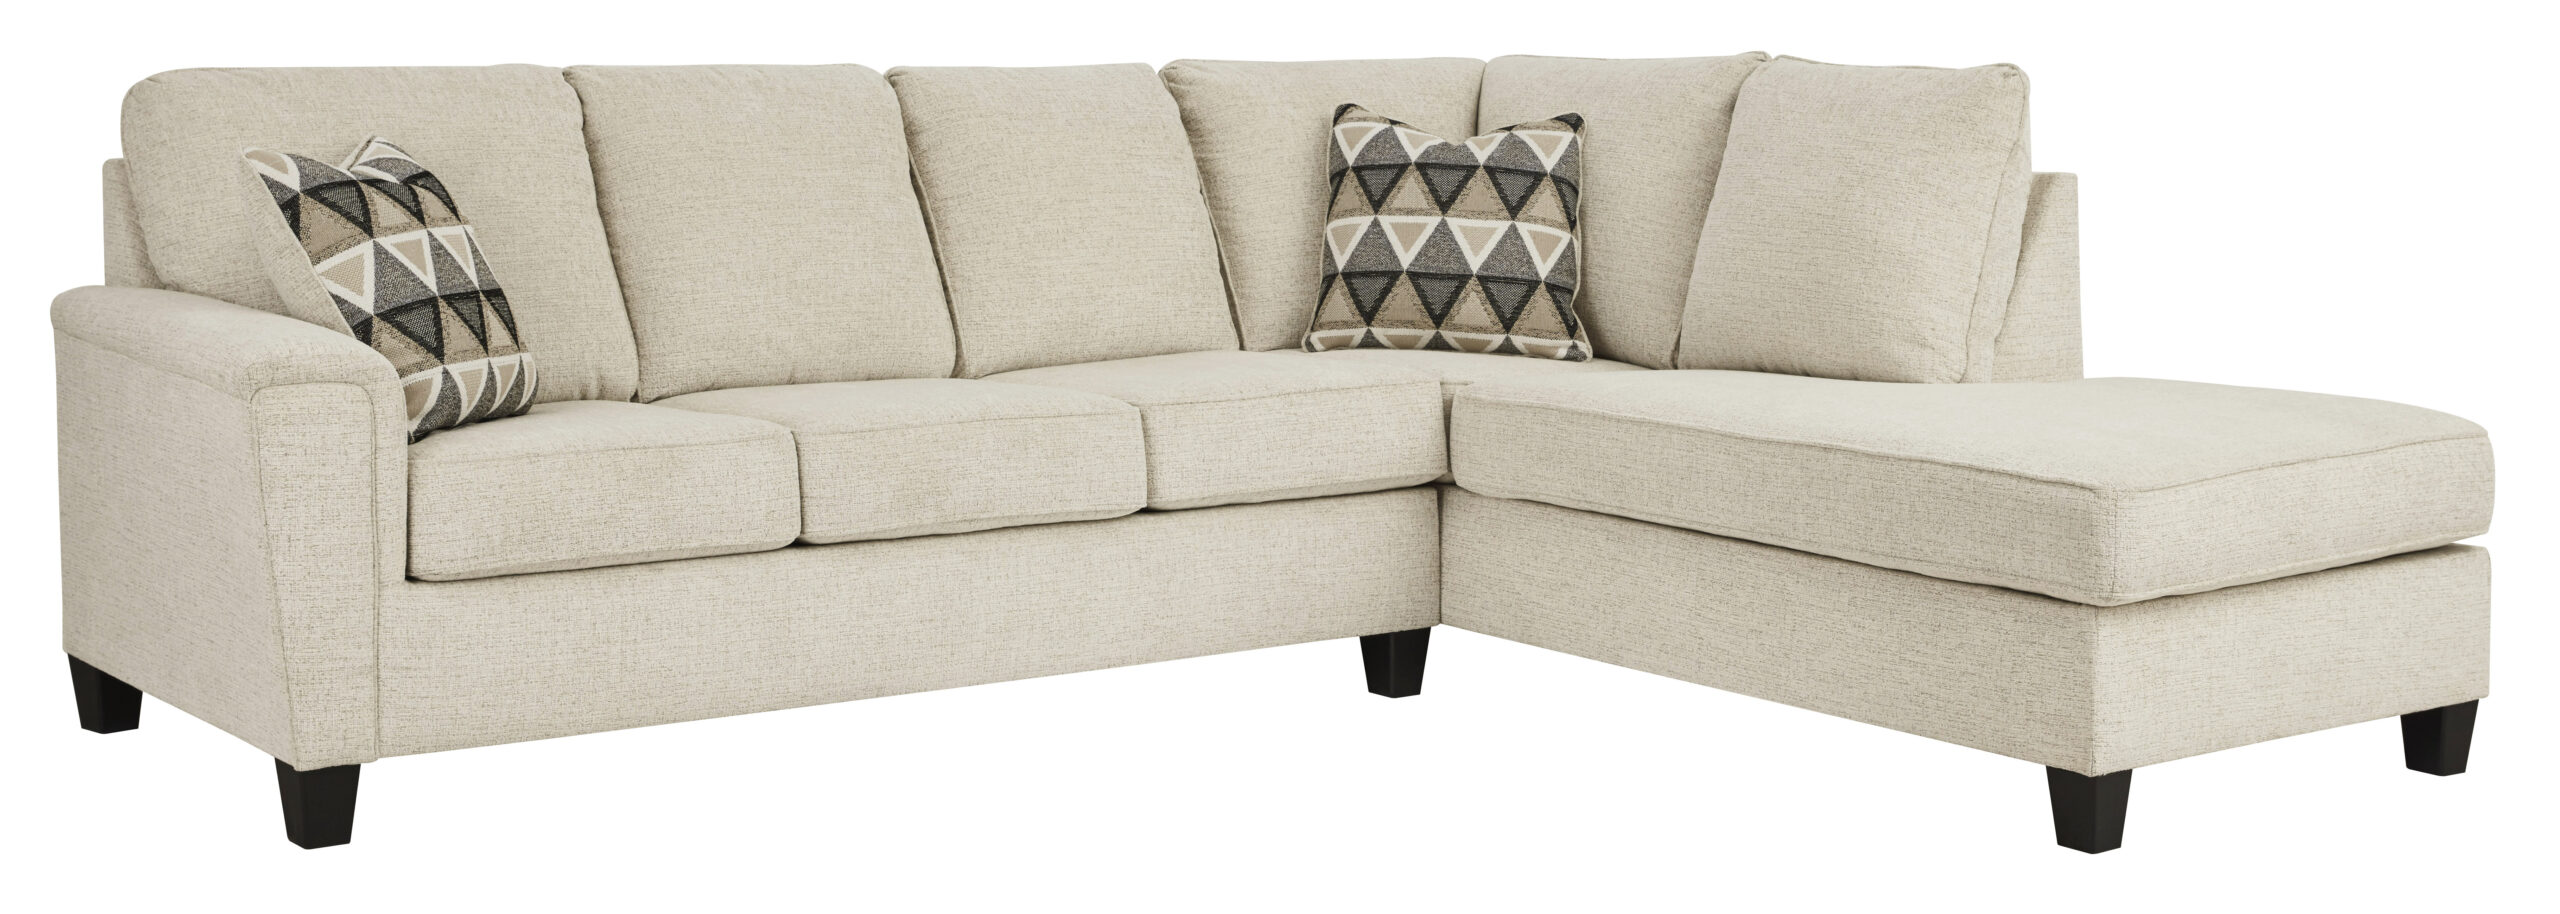 83904-66-17 Abinger Natural Sectional